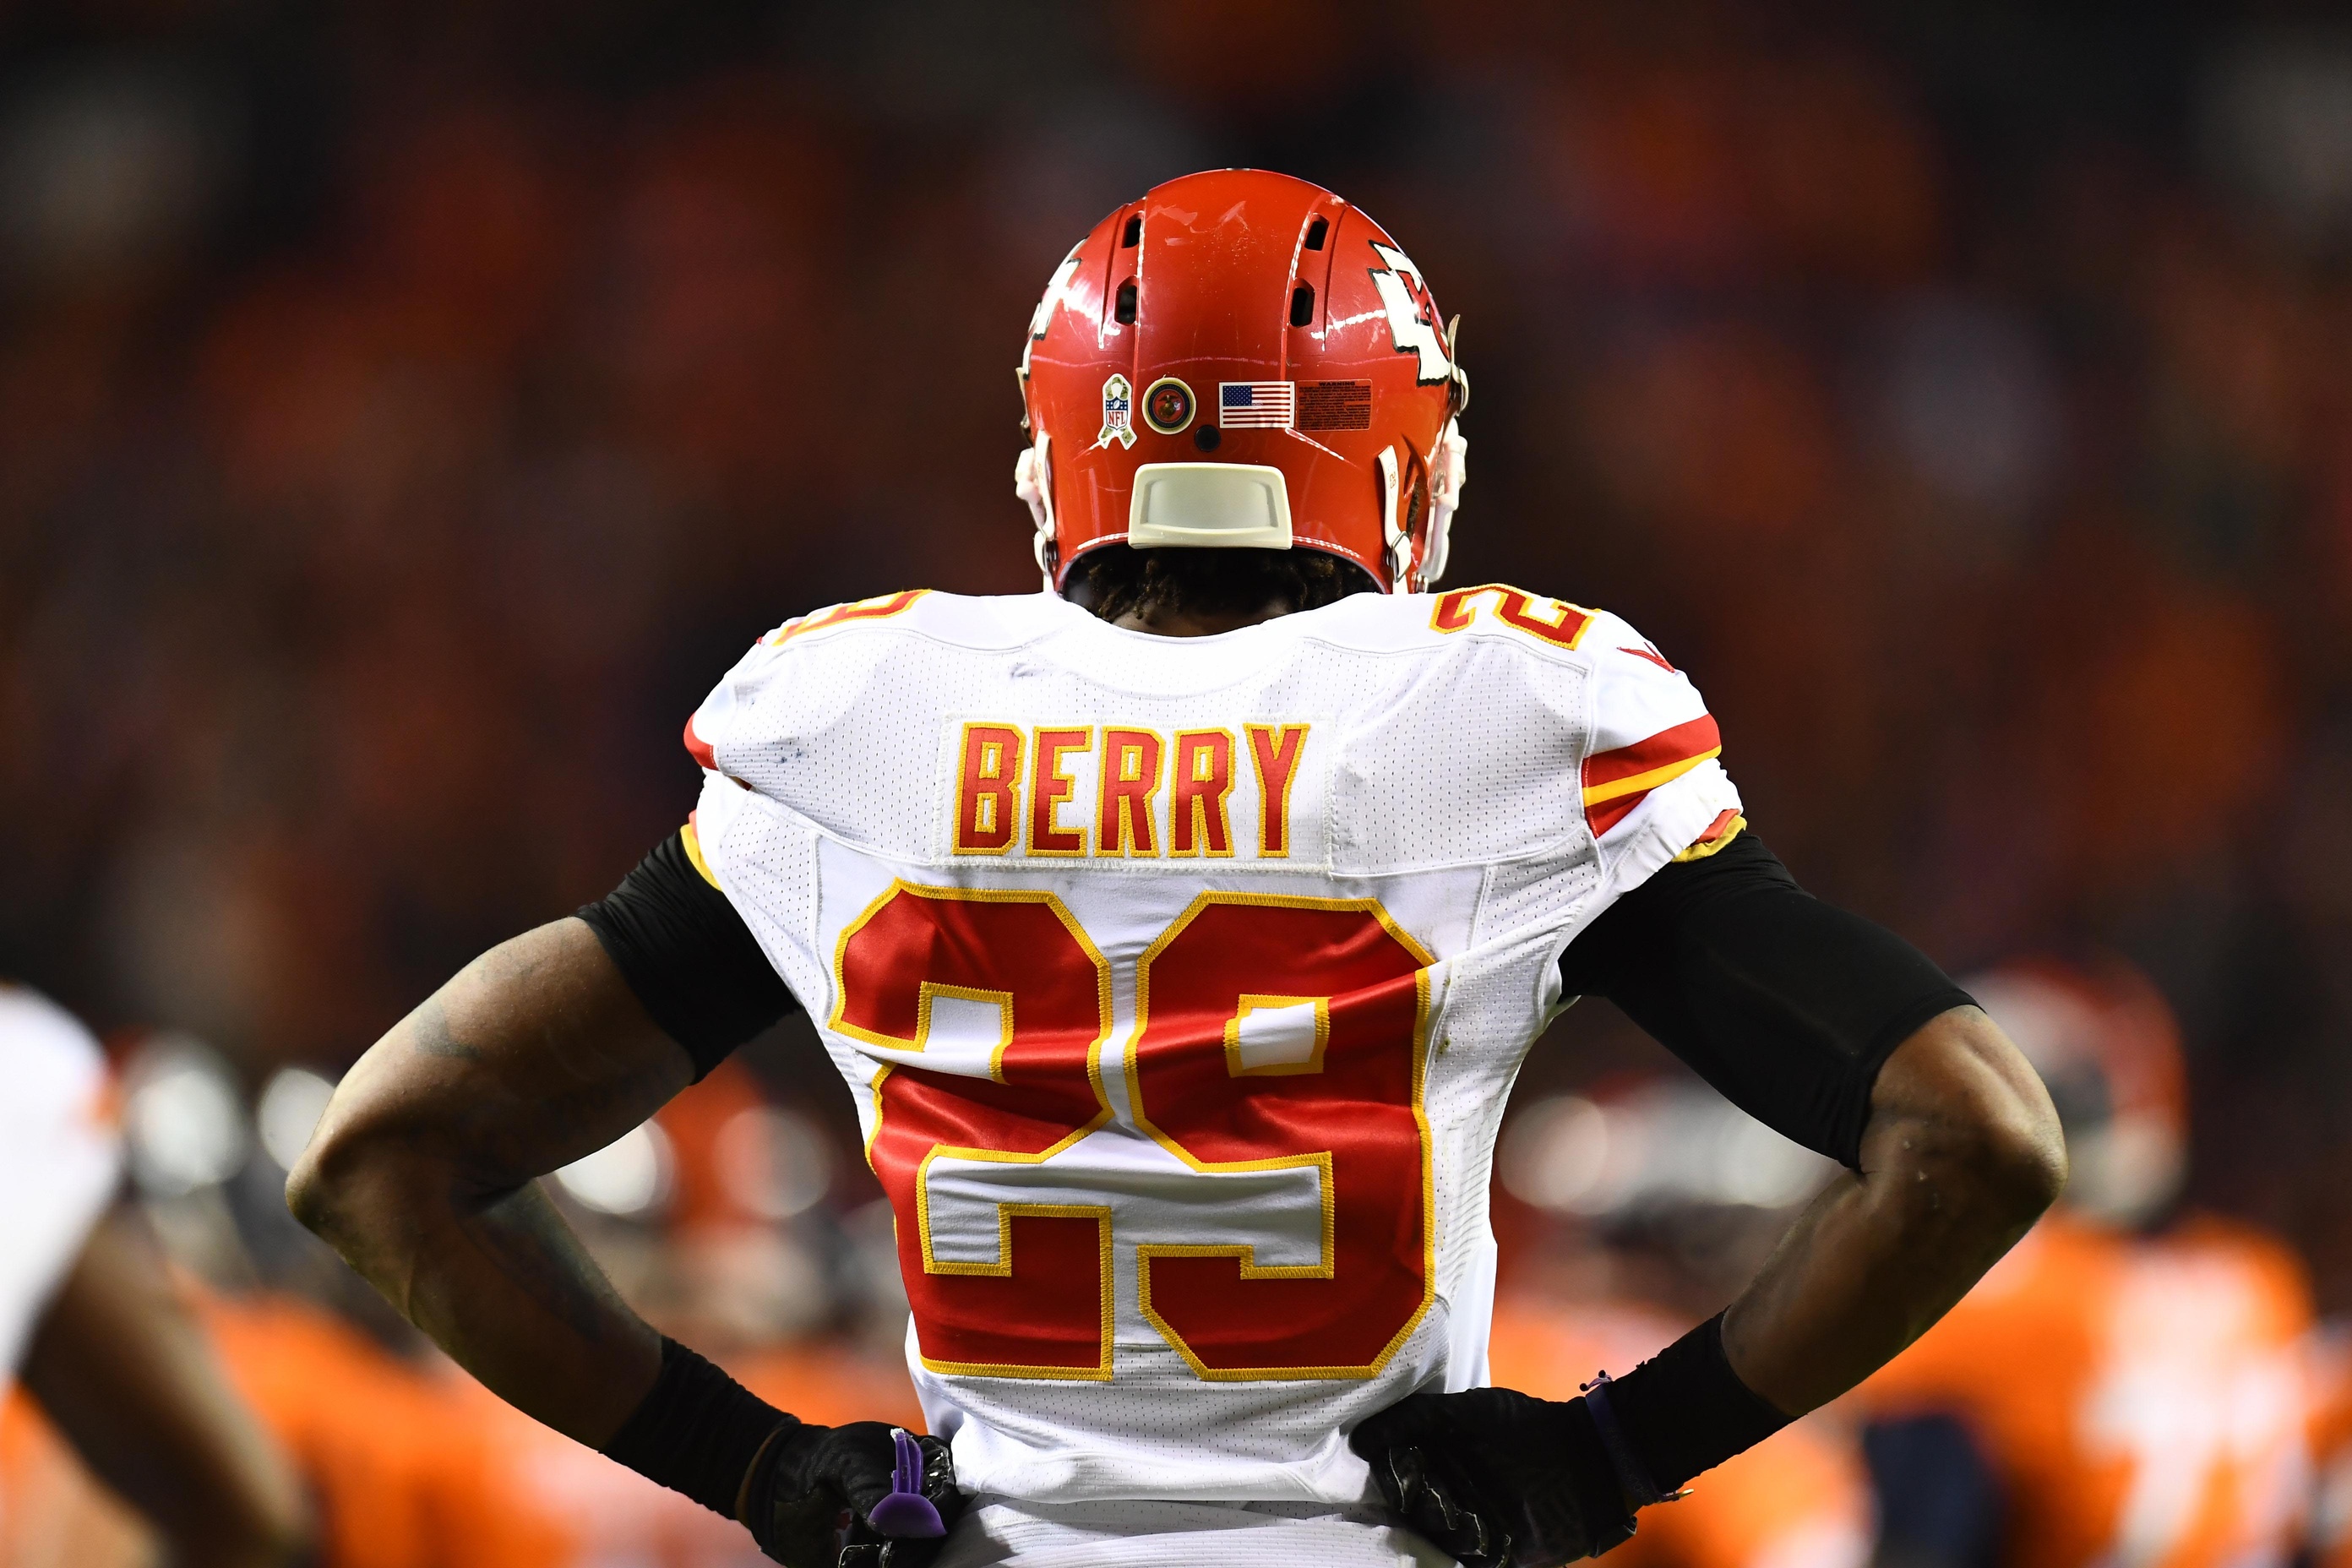 Eric Berry and Cordarrelle Patterson named to NFL Pro Bowl